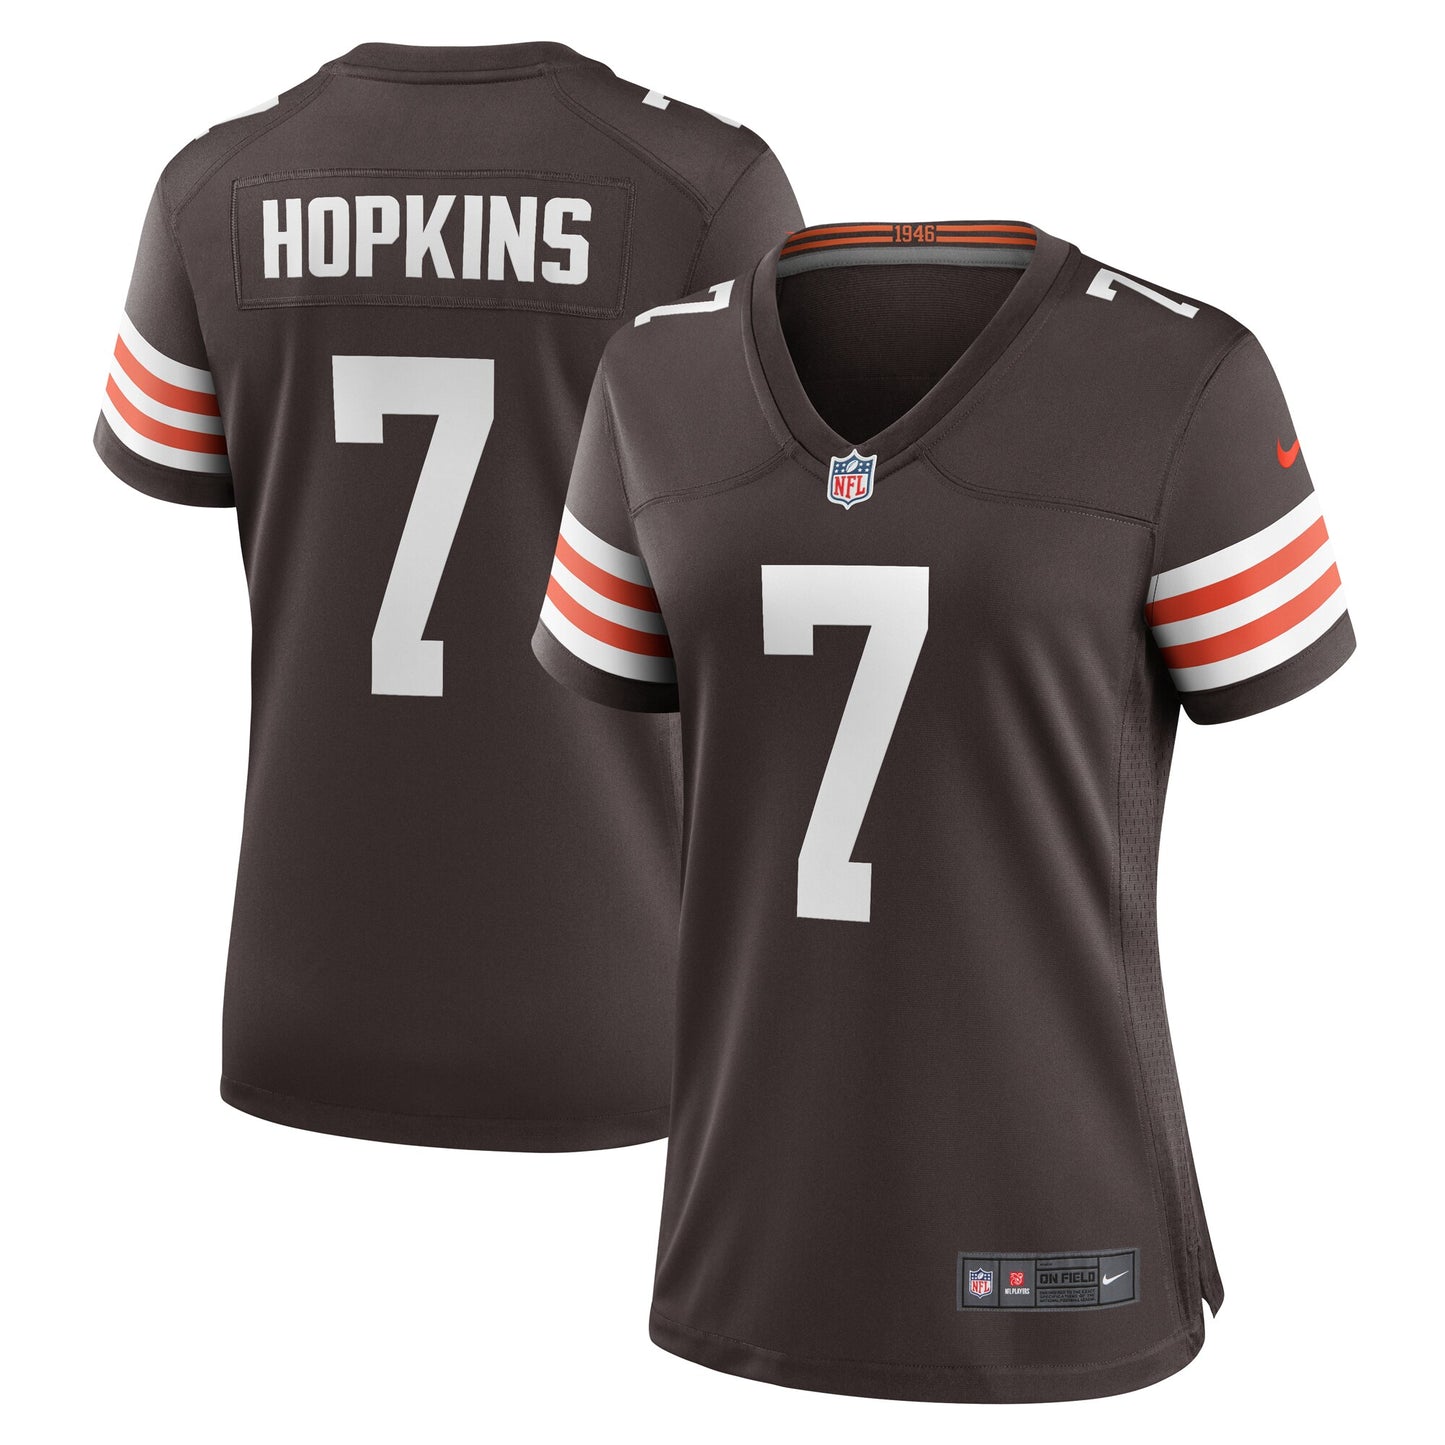 Dustin Hopkins Cleveland Browns Nike Women's Team Game Jersey - Brown